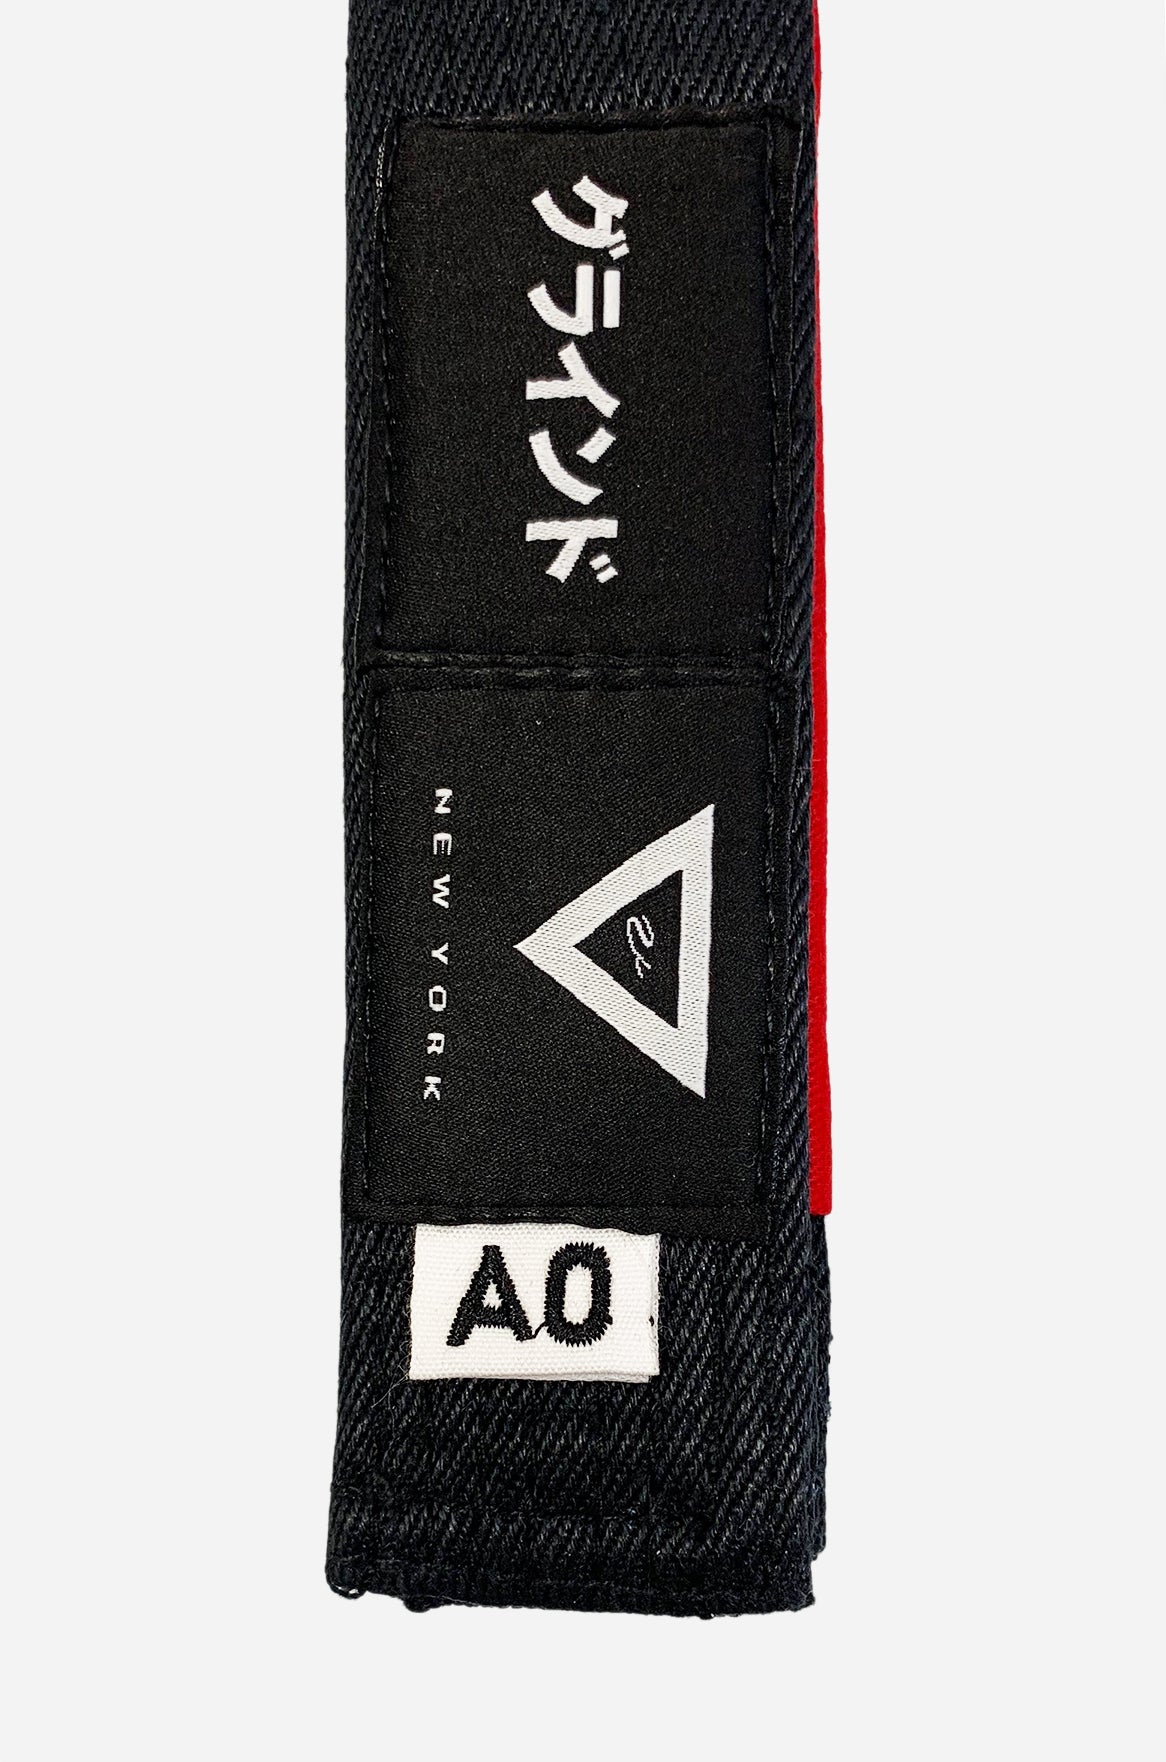 Brazilian Jiu Jitsu HEMP BELT BLACK LABEL (SPECIAL EDITION) This belt is made with HEMP fabric. 8 count stitching High quality label Natural hemp fabric’s structure allows air goes through easily. This helps to prevent from bacteria adherence and dwelling. Natural dry under sunlight will help to maintain the belt clean. vhts europe